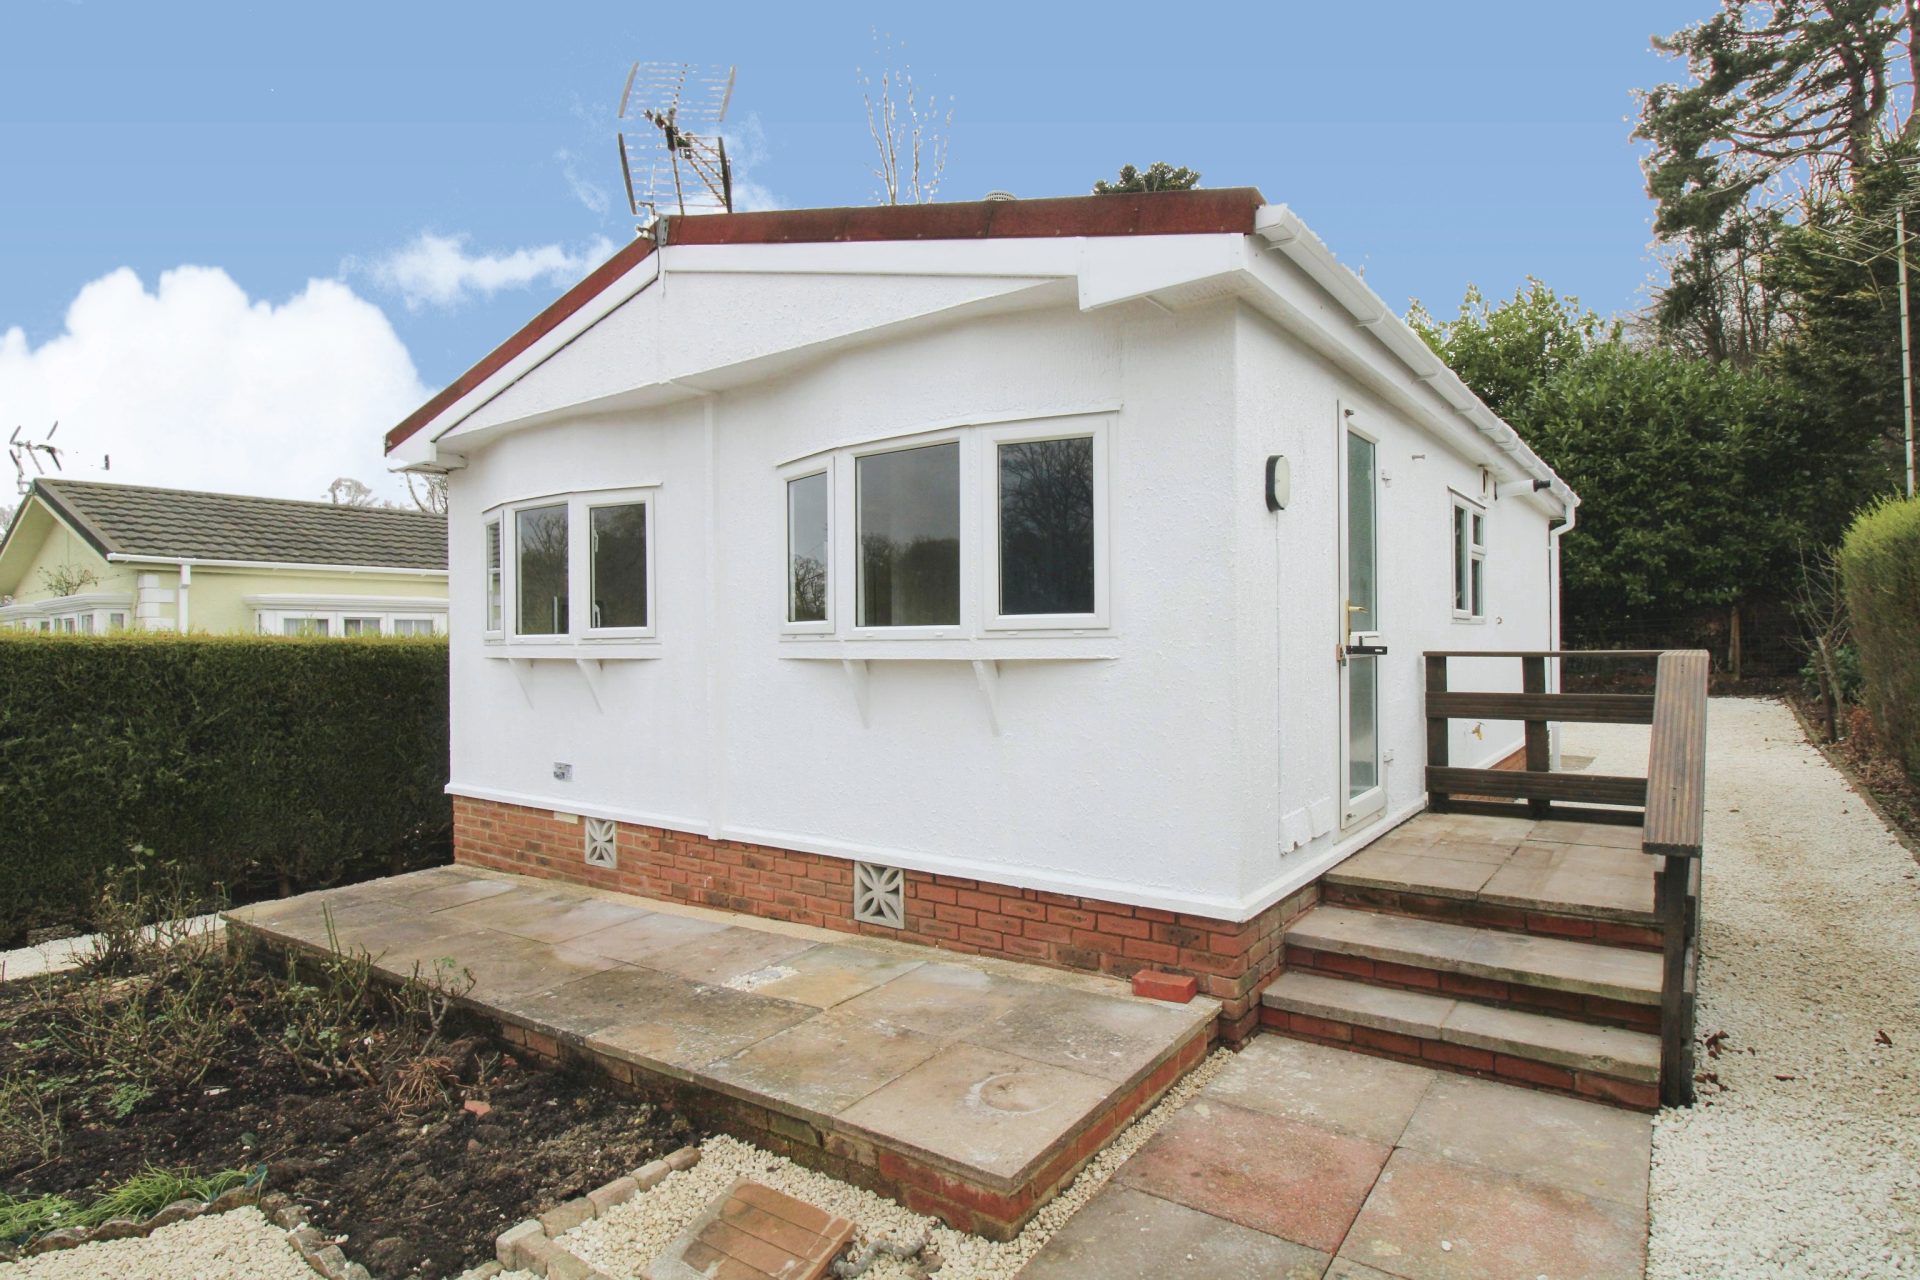 bungalows for sale in hertfordshire